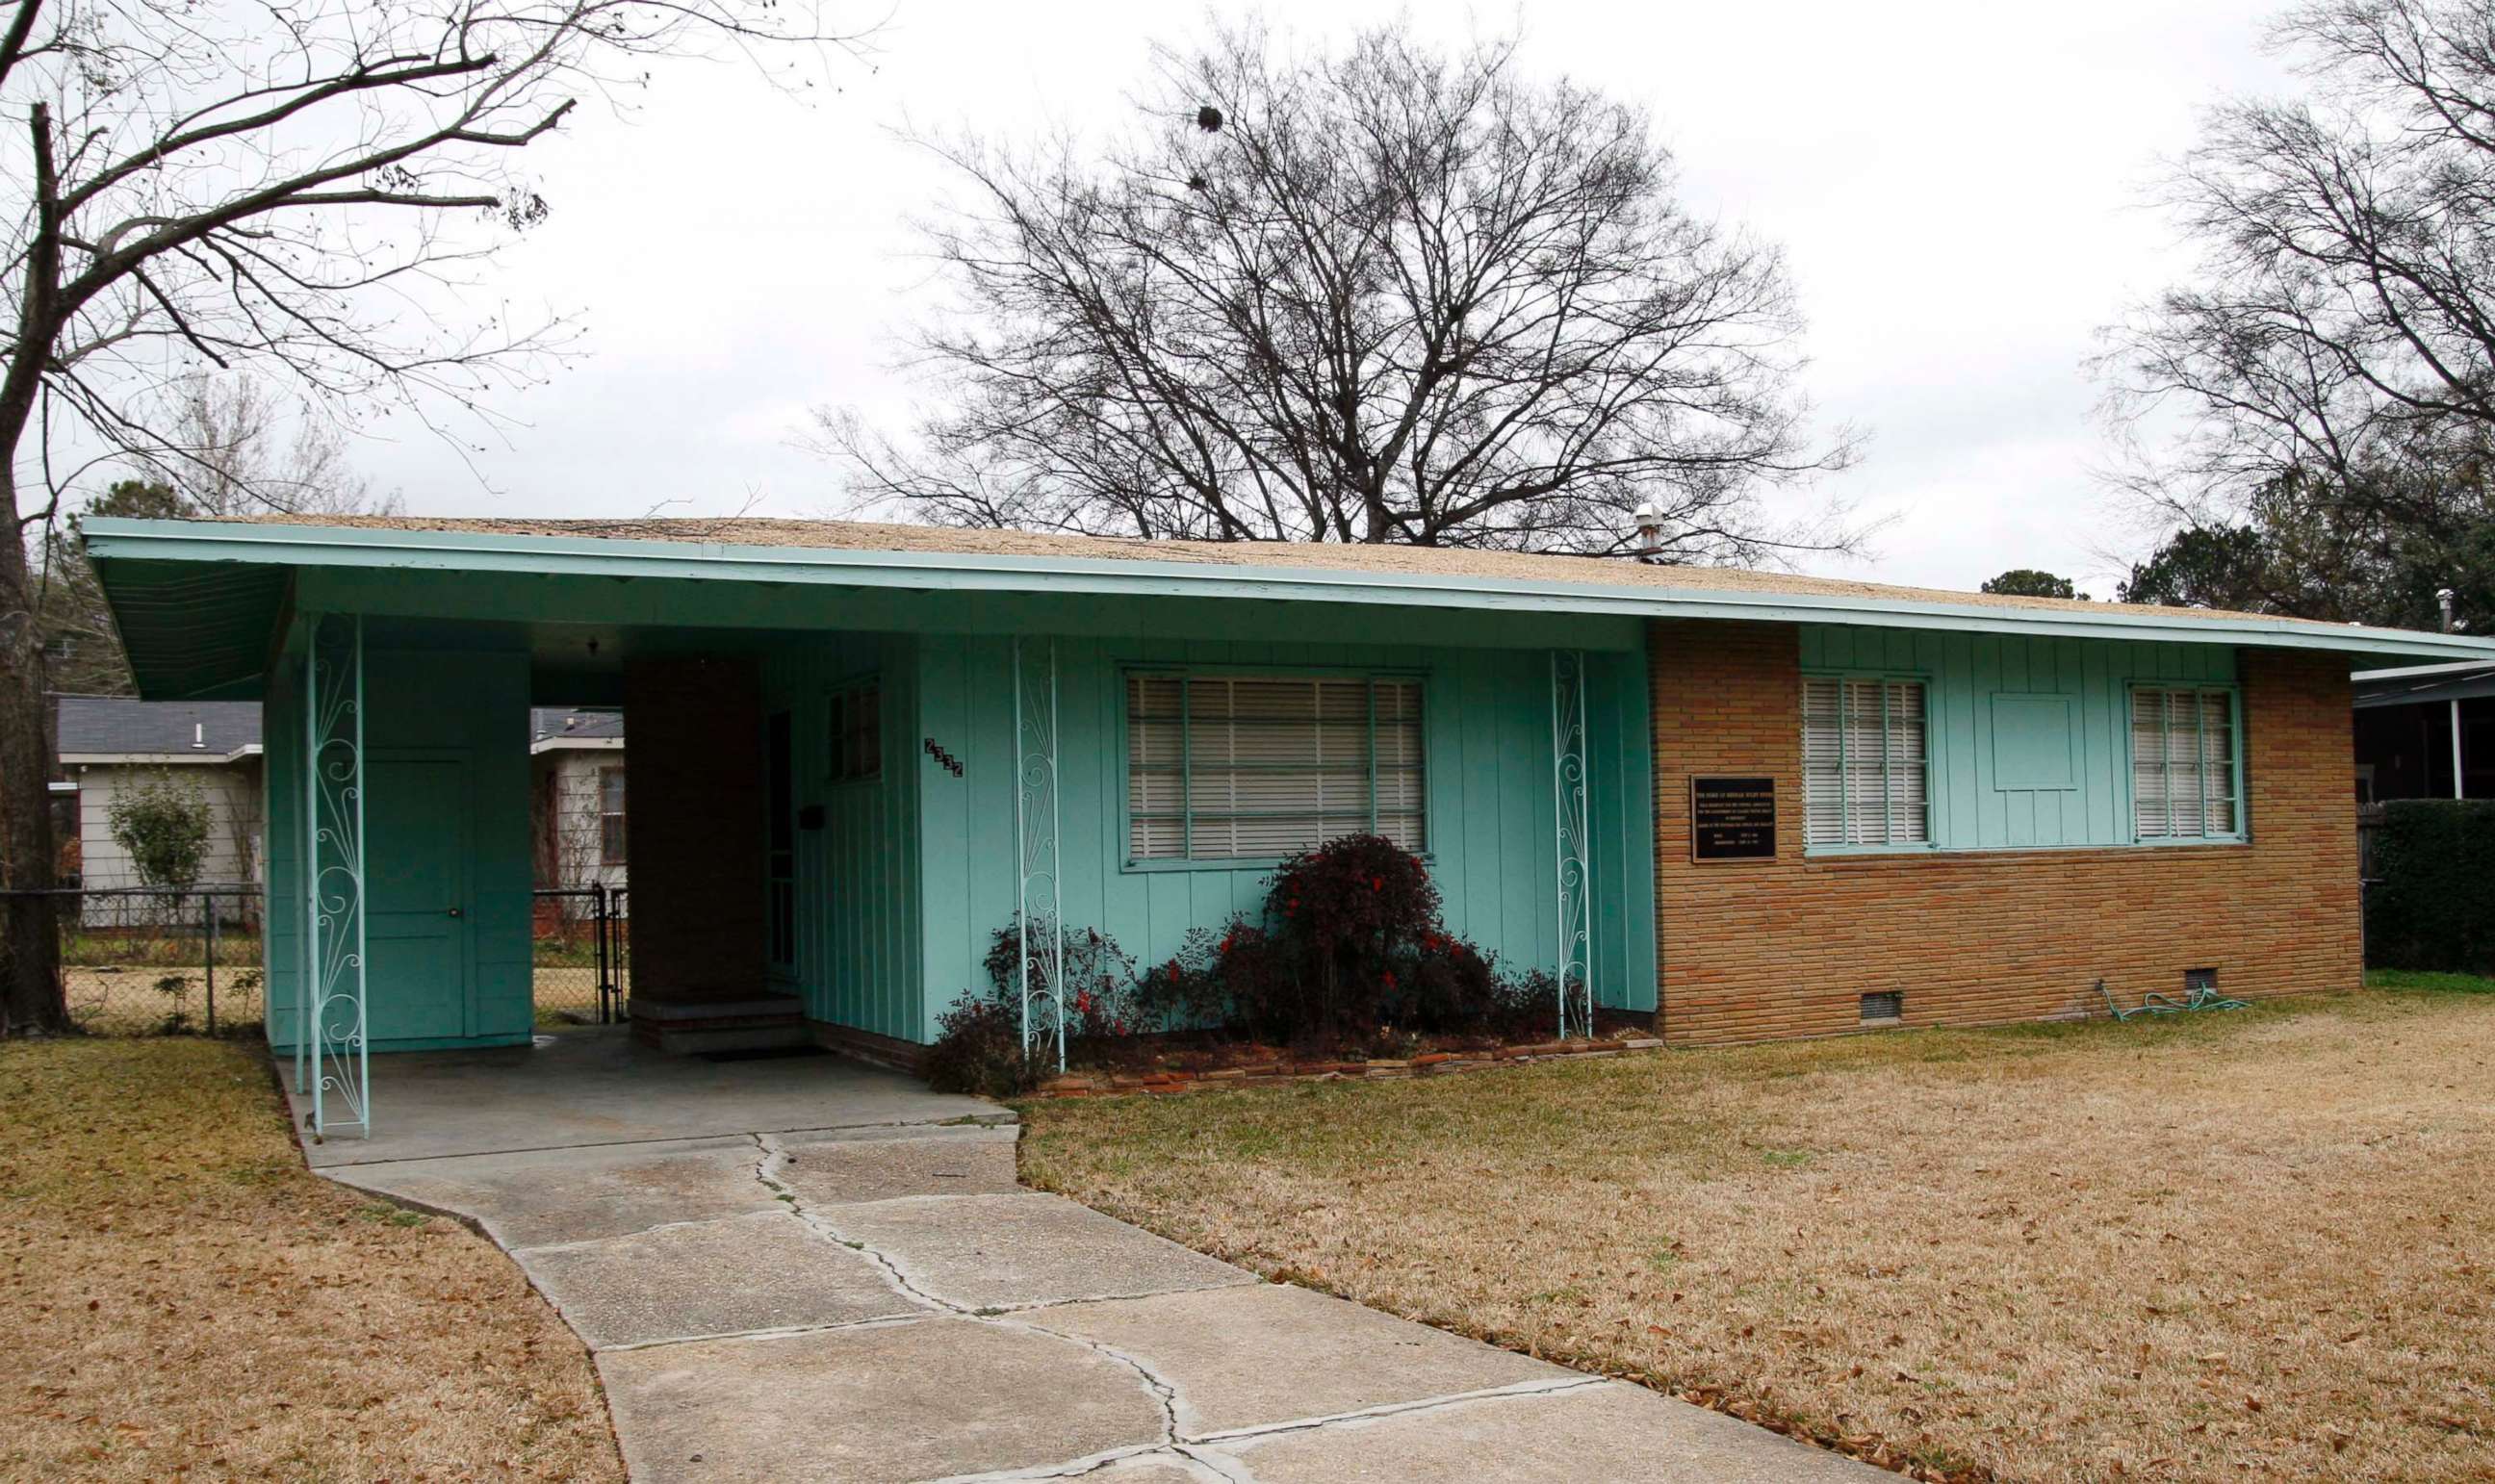 PHOTO: The house of slain civil rights leader Medgar Evers located in Jackson, Miss., is seen on Jan. 29, 2008.